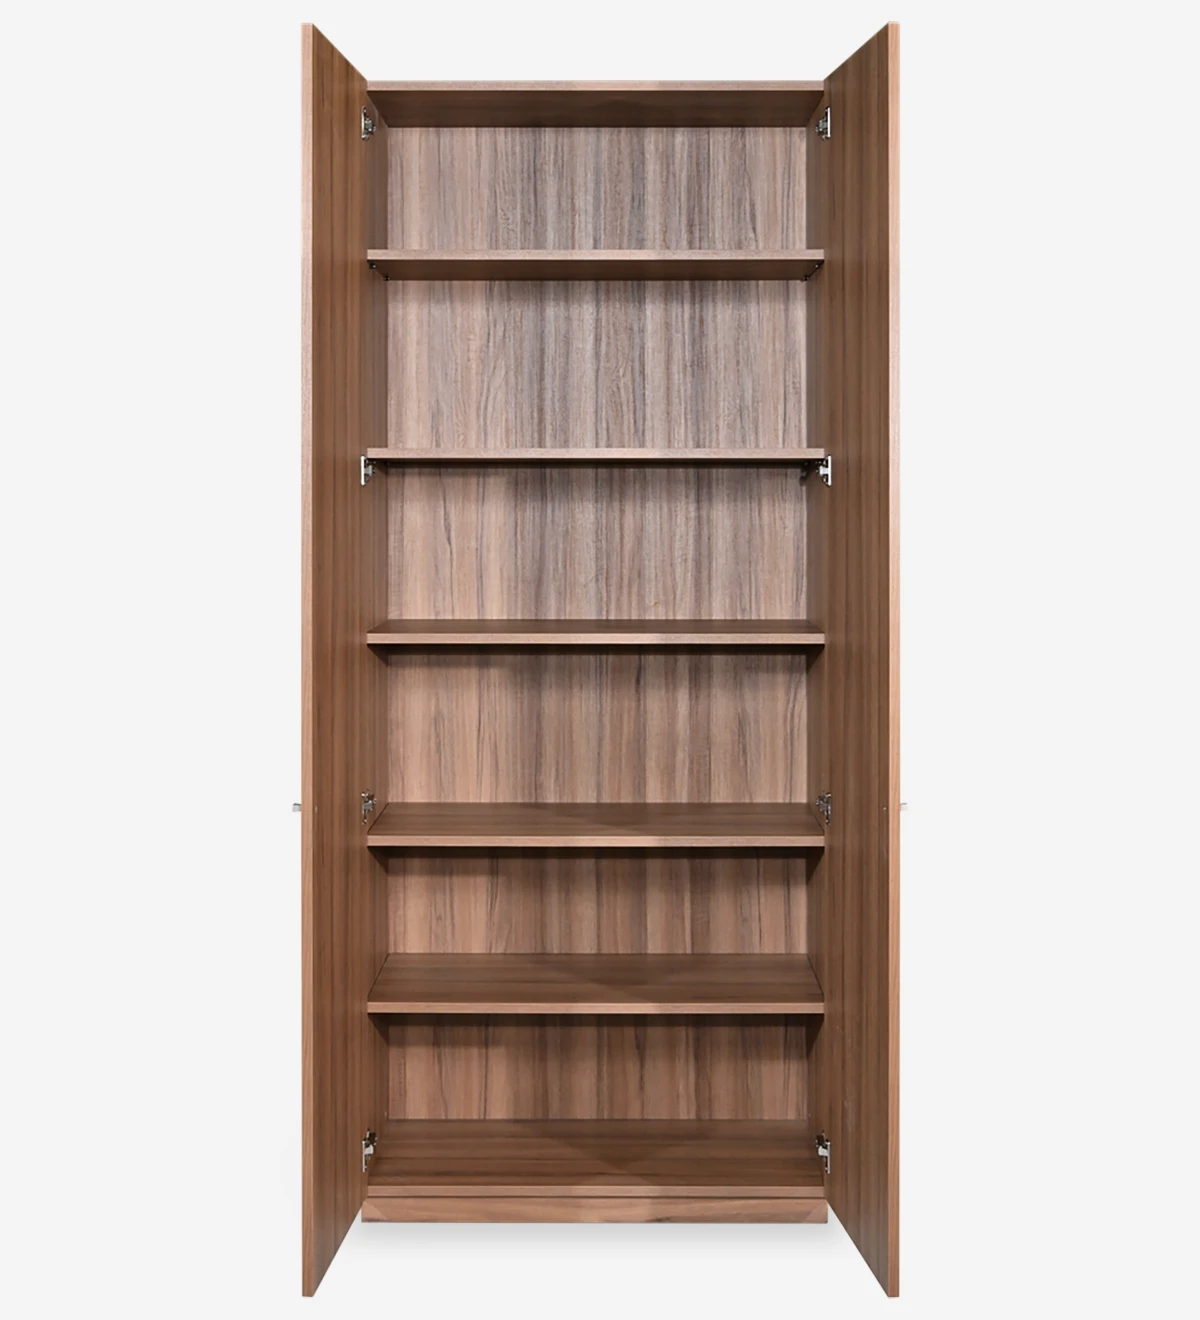 Tall bookcase in walnut, with 2 doors and removable shelves.